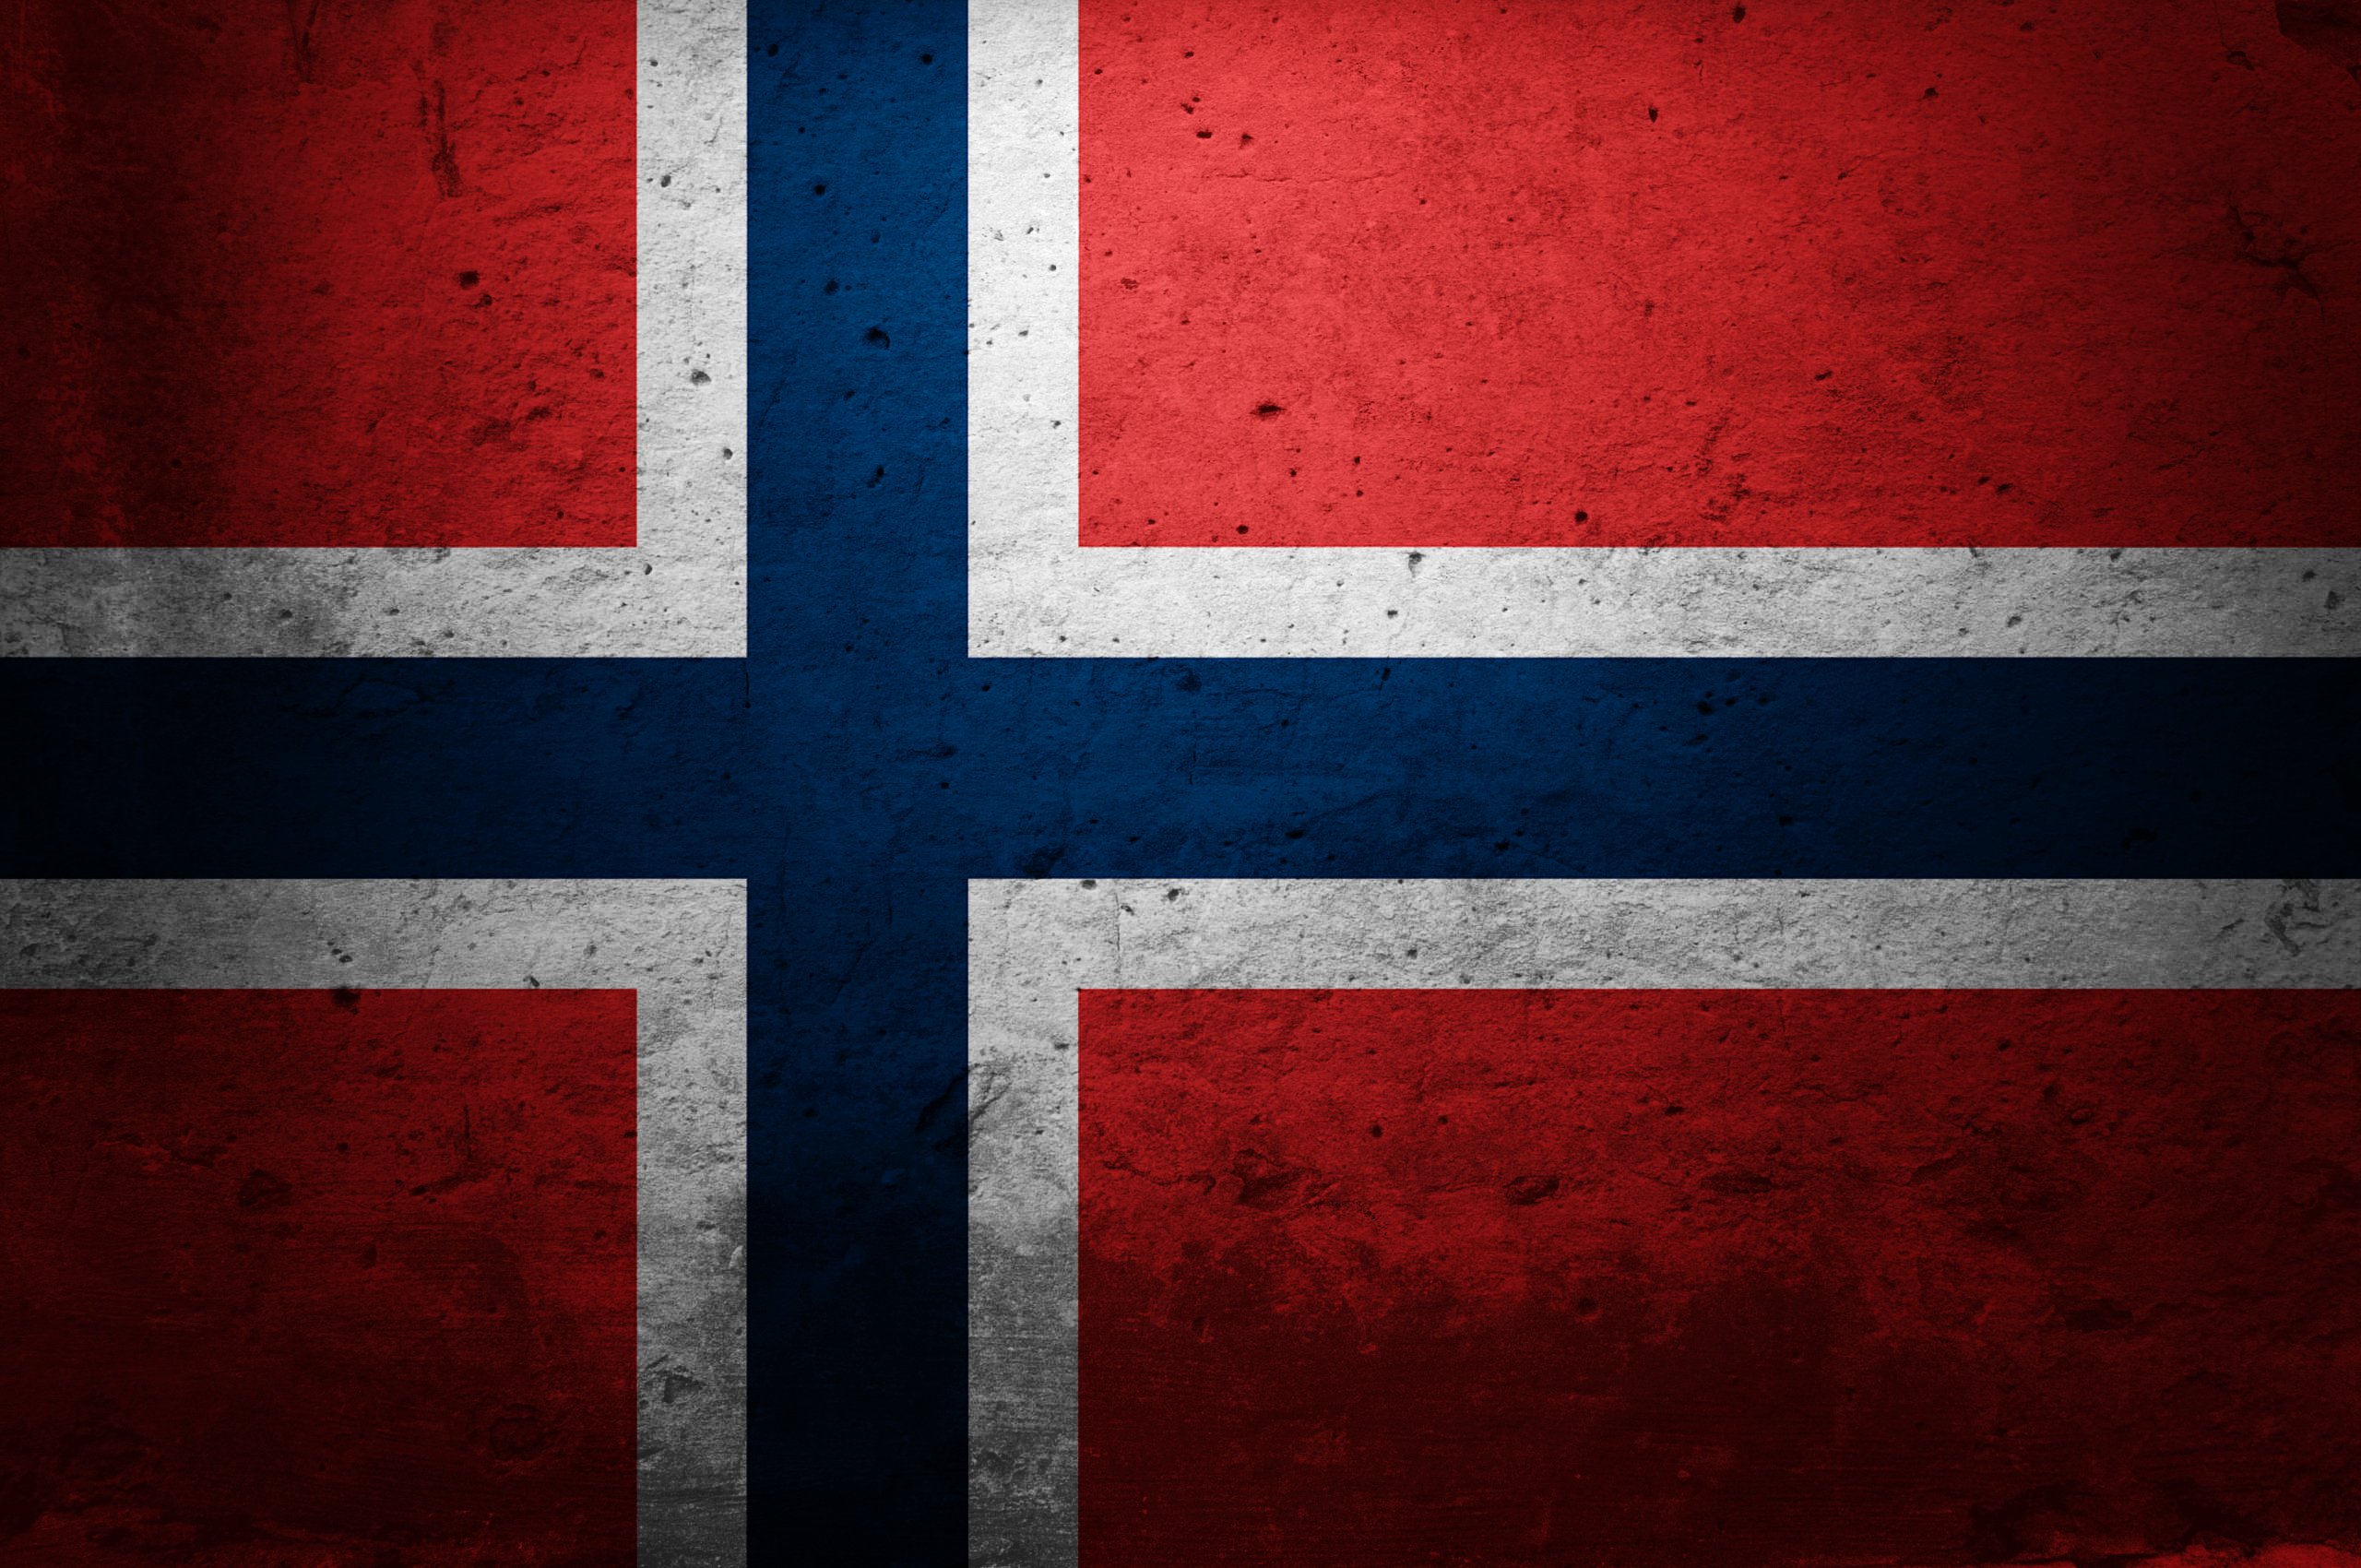 1000+ Norway Flag Pictures | Download Free Images on Unsplash